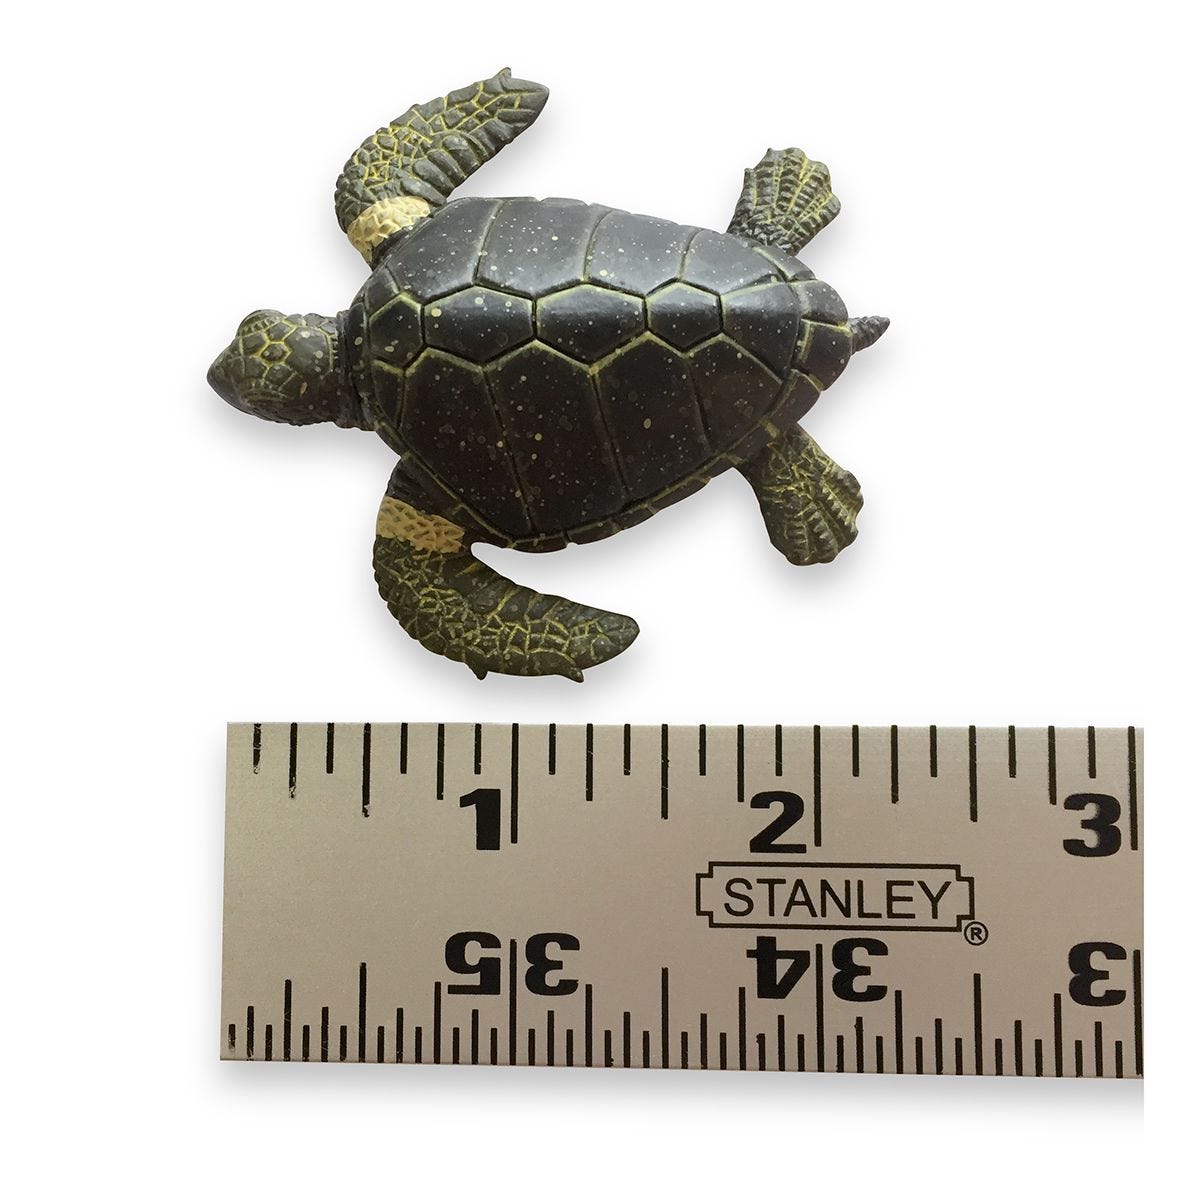 My Turtle Store  Digital Thermometer with battery for turtle tanks